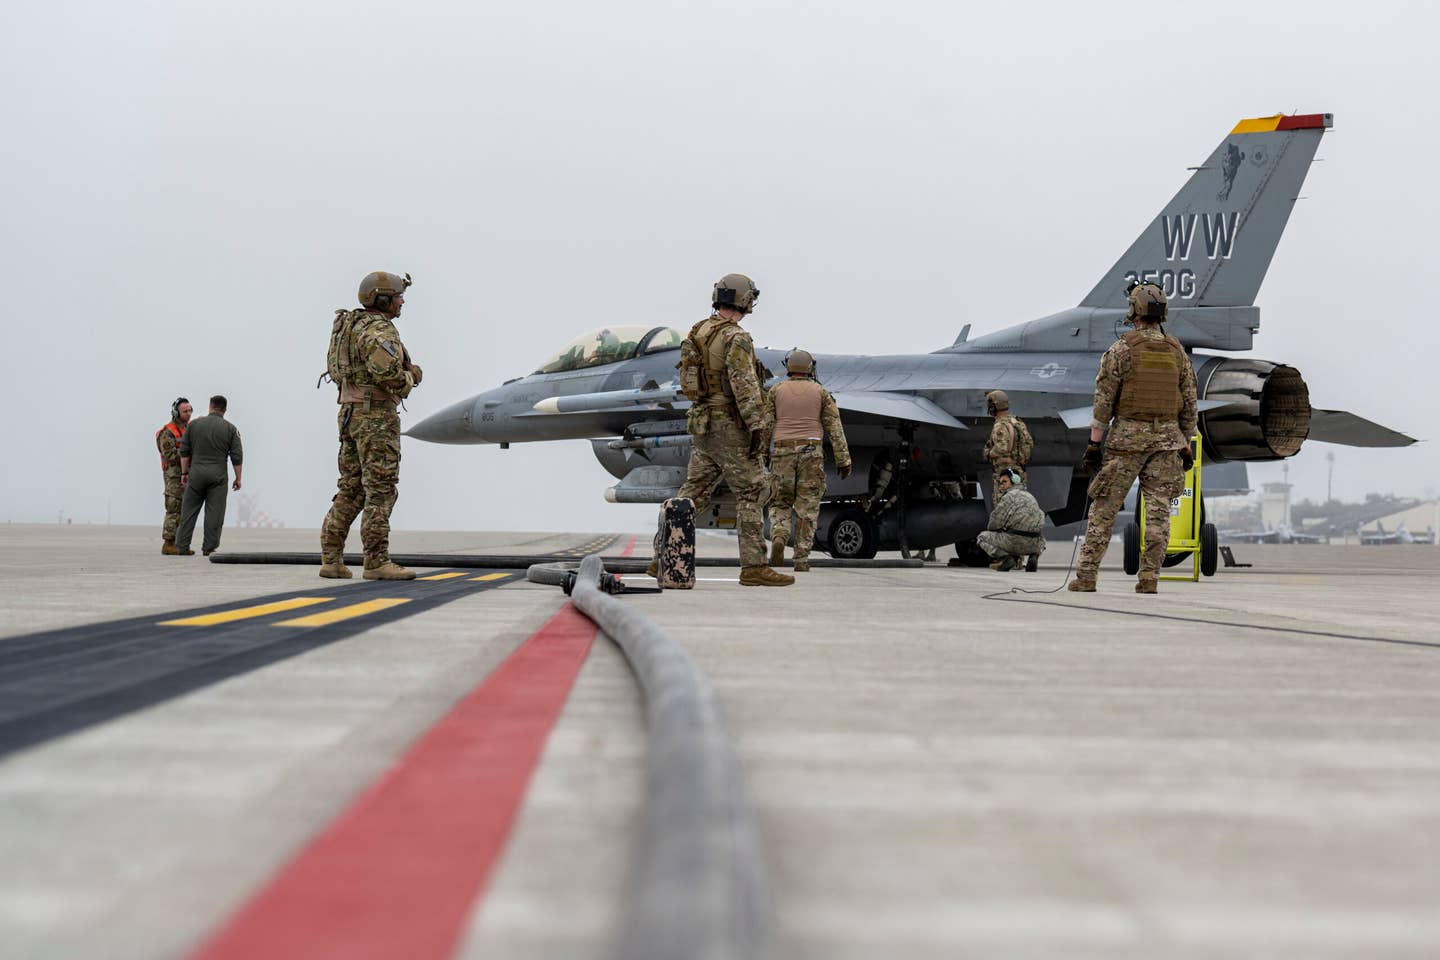 Airmen from the 18th Logistic Readiness Squadron and 1st Special Operations Squadron from Kadena Air Base, Japan, refuel an F-16C during a forward area refueling point training at Misawa Air Base, Japan, June 25, 2020. <em>U.S. Air Force photo by Staff Sgt. Melanie A. Bulow-Gonterman</em>